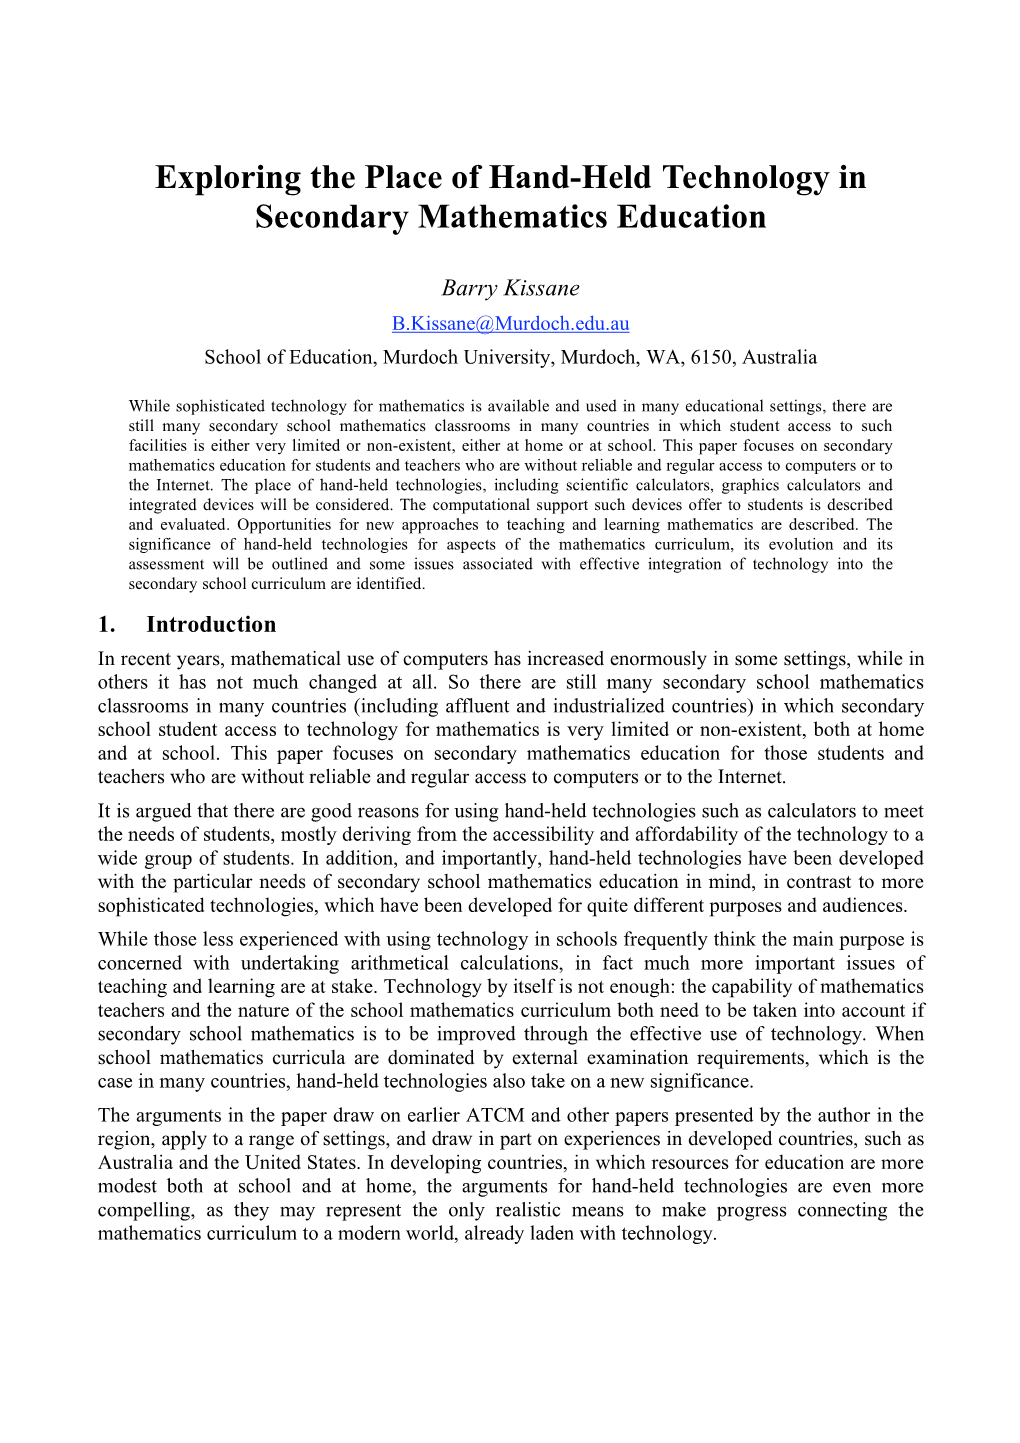 Exploring the Place of Hand-Held Technology in Secondary Mathematics Education